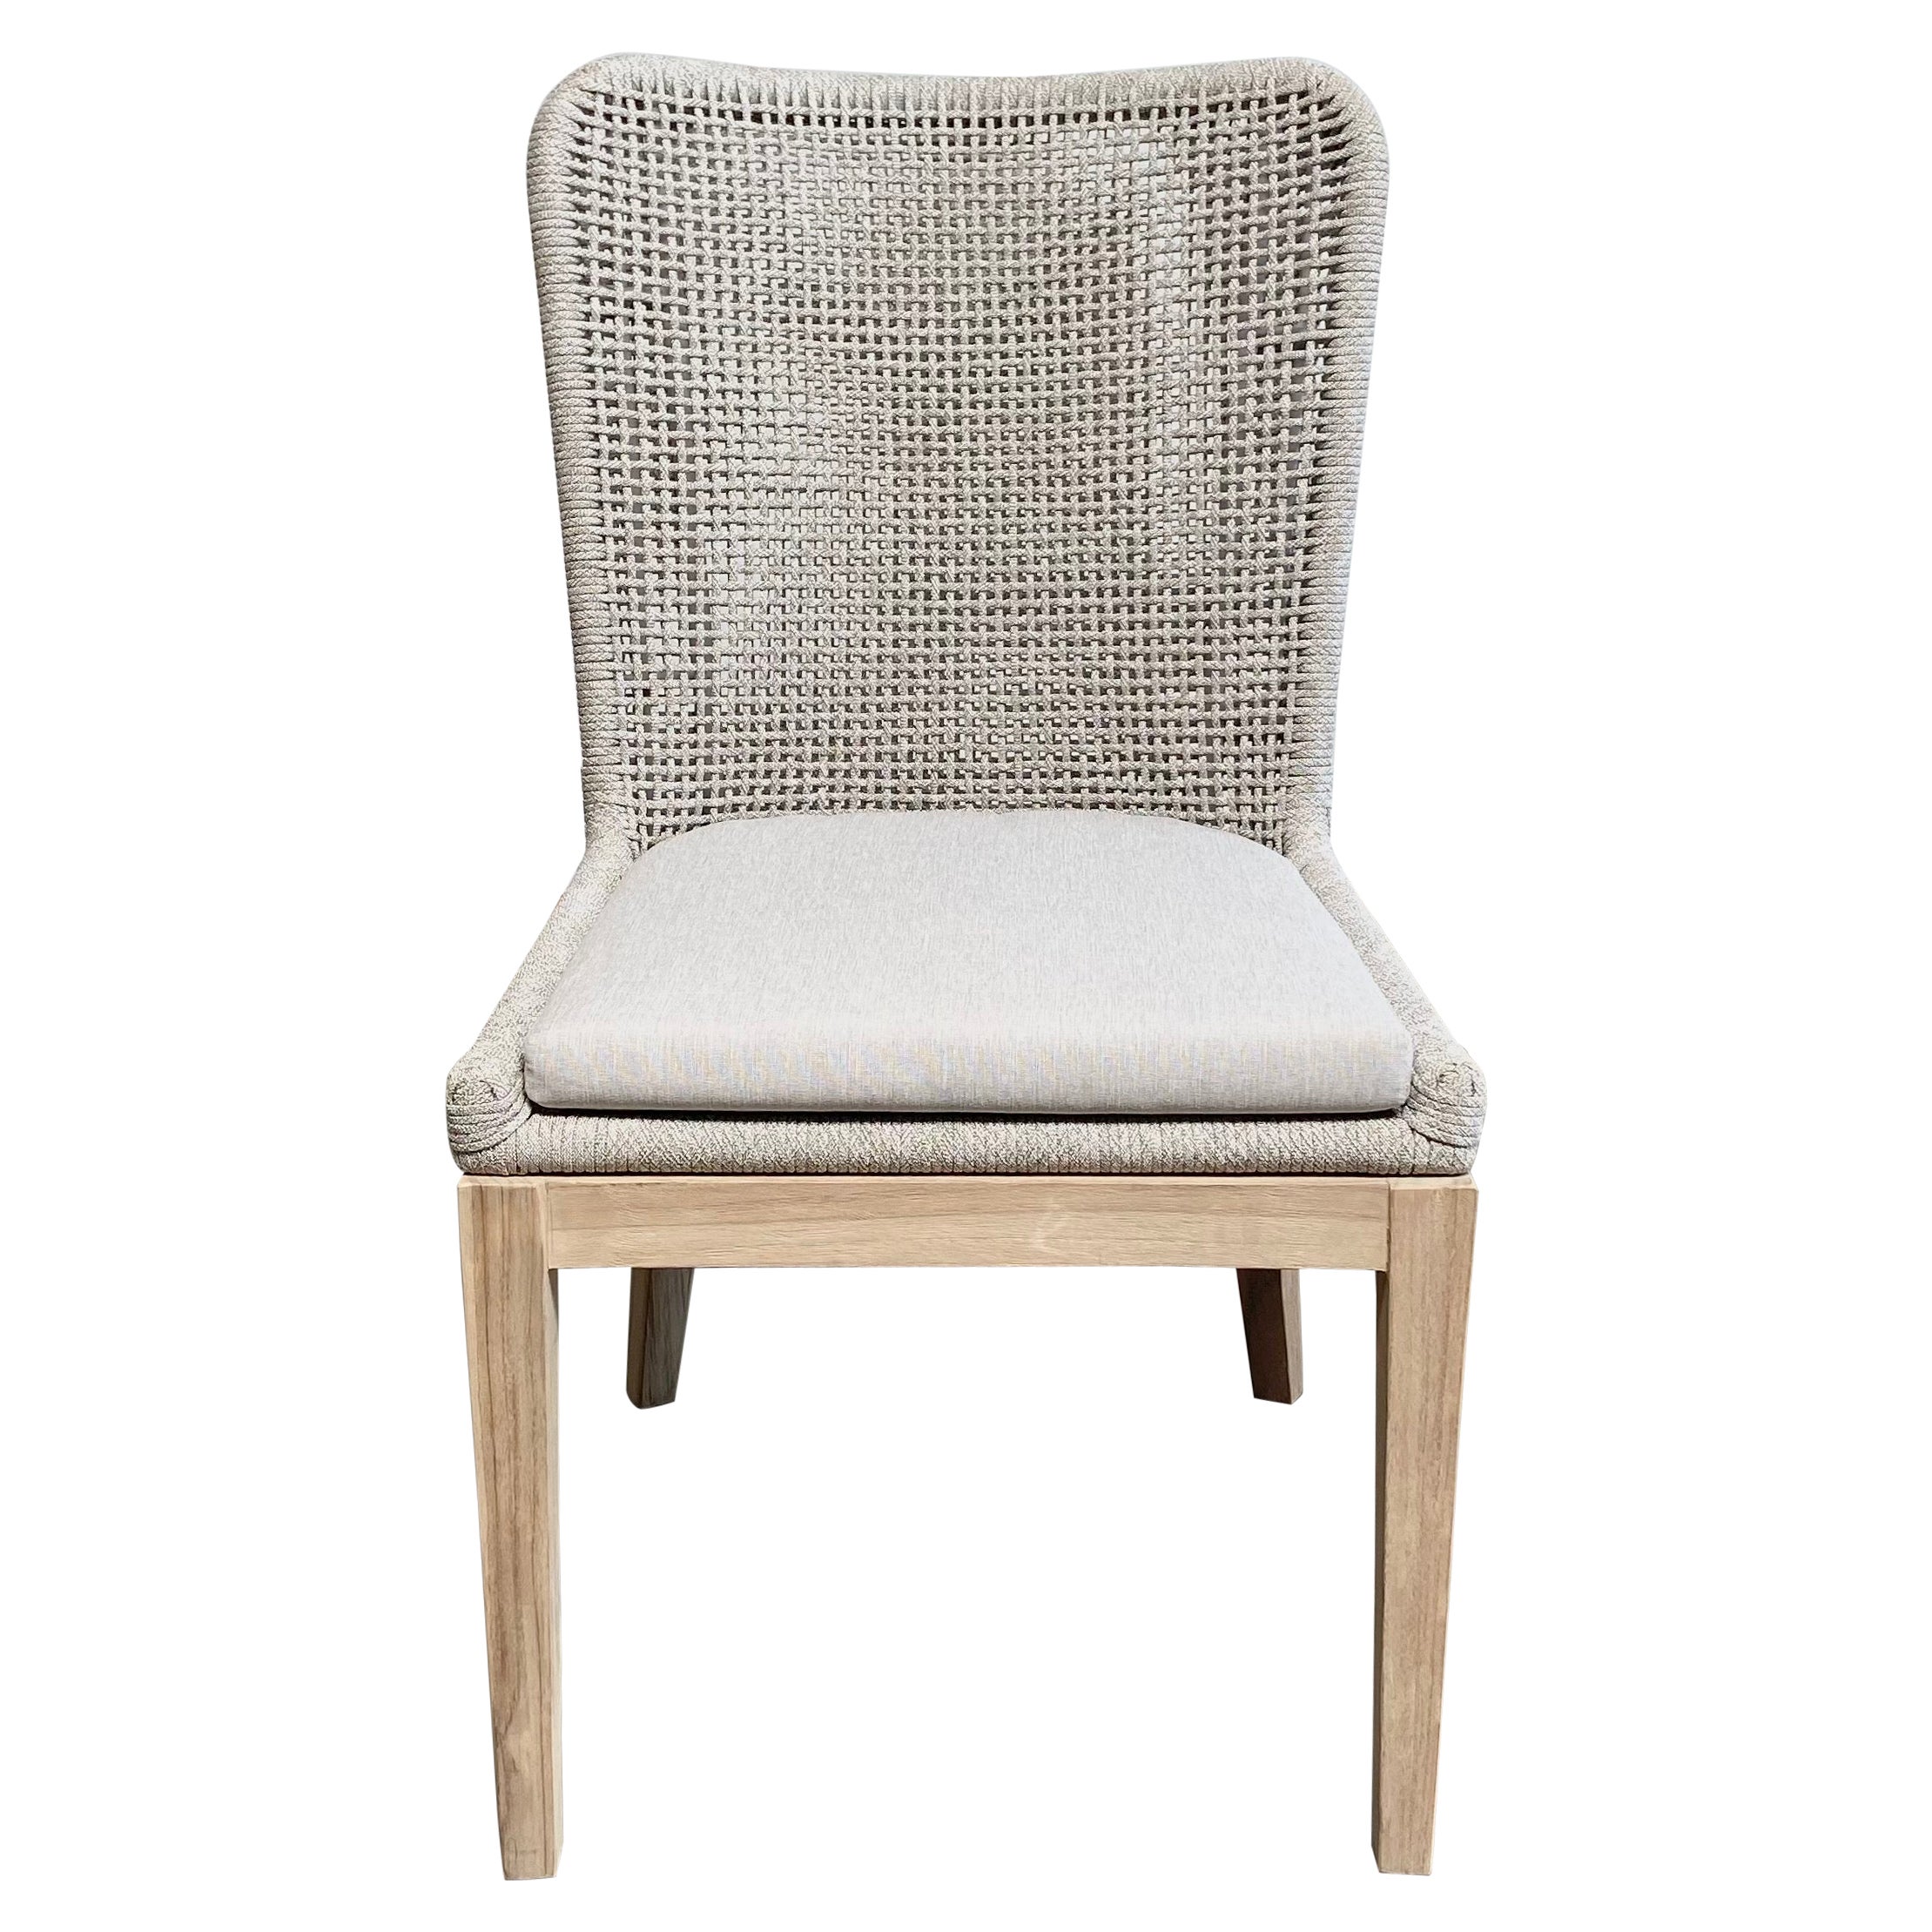 Teak Wood and Woven Rope Outdoor Dining Chairs